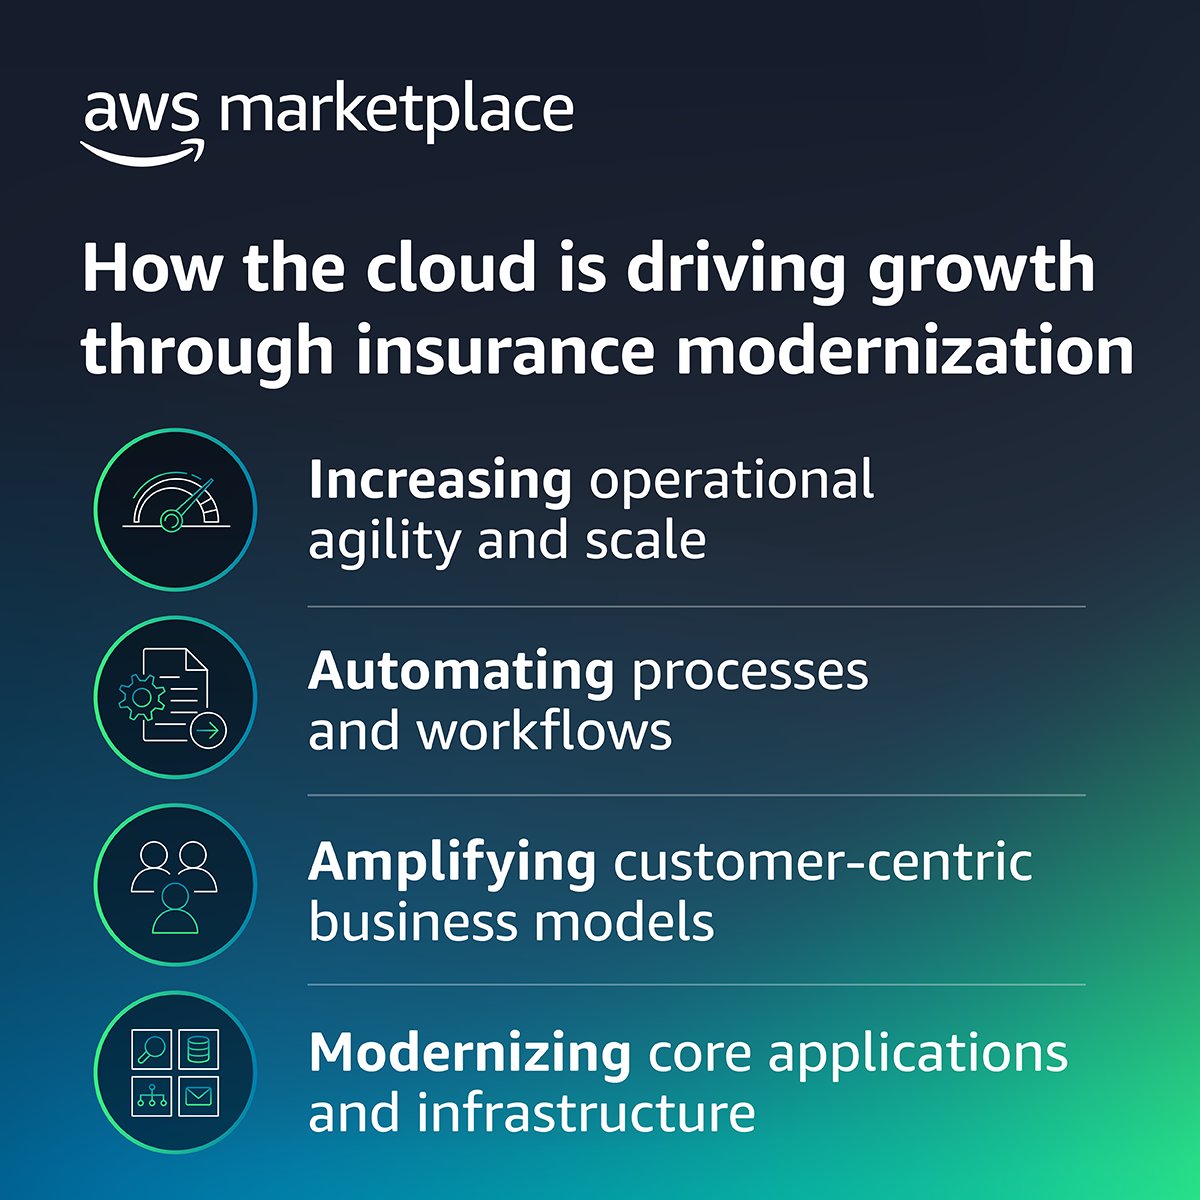 #Cloud technologies are driving significant impact within the #insurance industry, enabling insurance providers to deliver exceptional business value now and in the future. Read how: go.aws/3V2vUyS